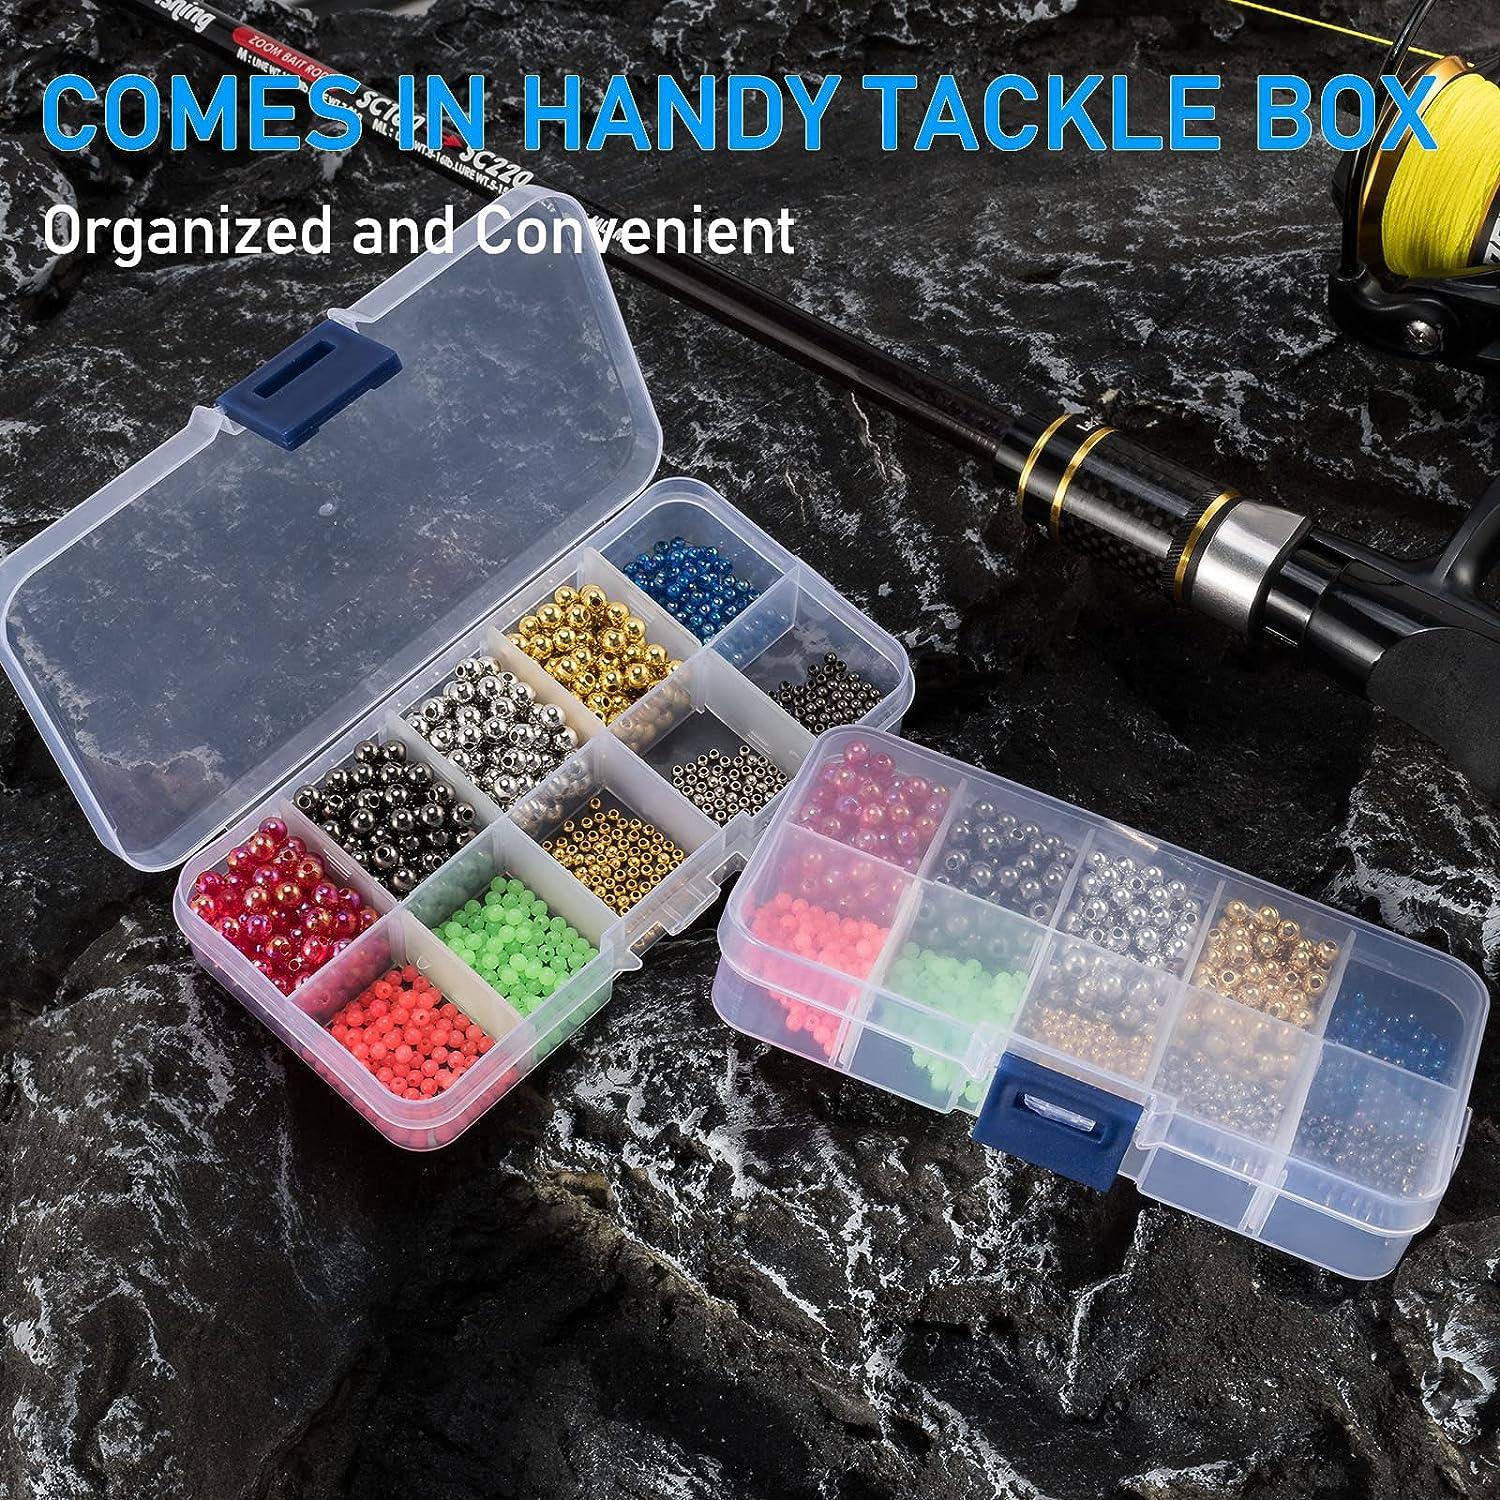 Dr.Fish Fishing Bead Bait Eggs Kits Floating Ball Stopper Plastic with Box  Glow Round Luminous Saltwater Freshwater Salmon Trout 500-3000pcs  1000pcs,0.08/0.12/0.2 inch